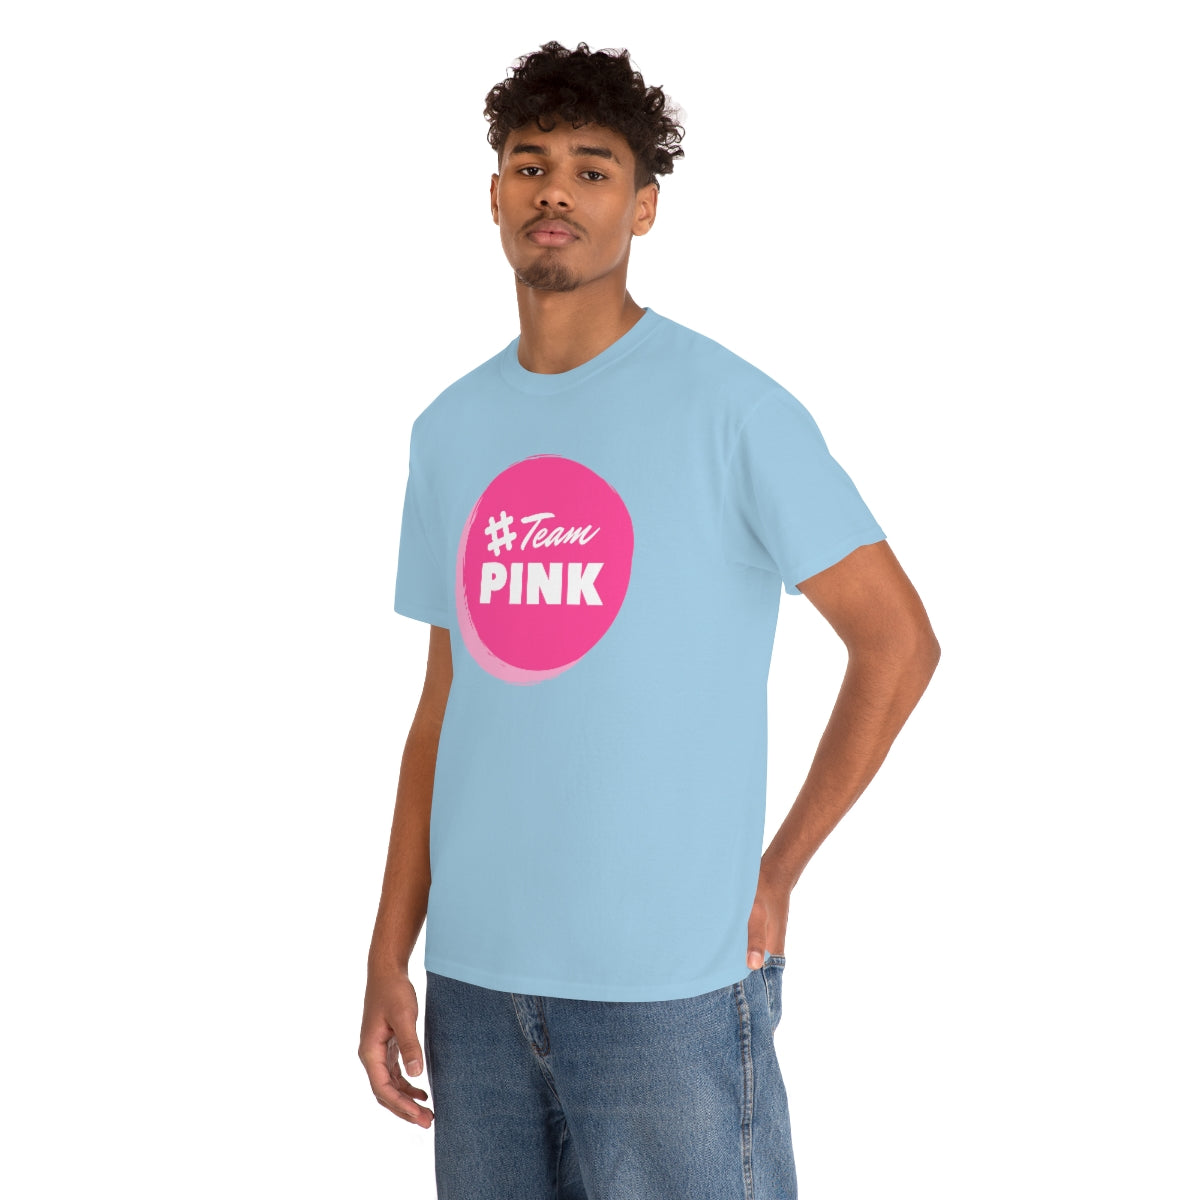 Team PINK Unisex Heavy Cotton Tee| Breast Cancer Awareness Tees